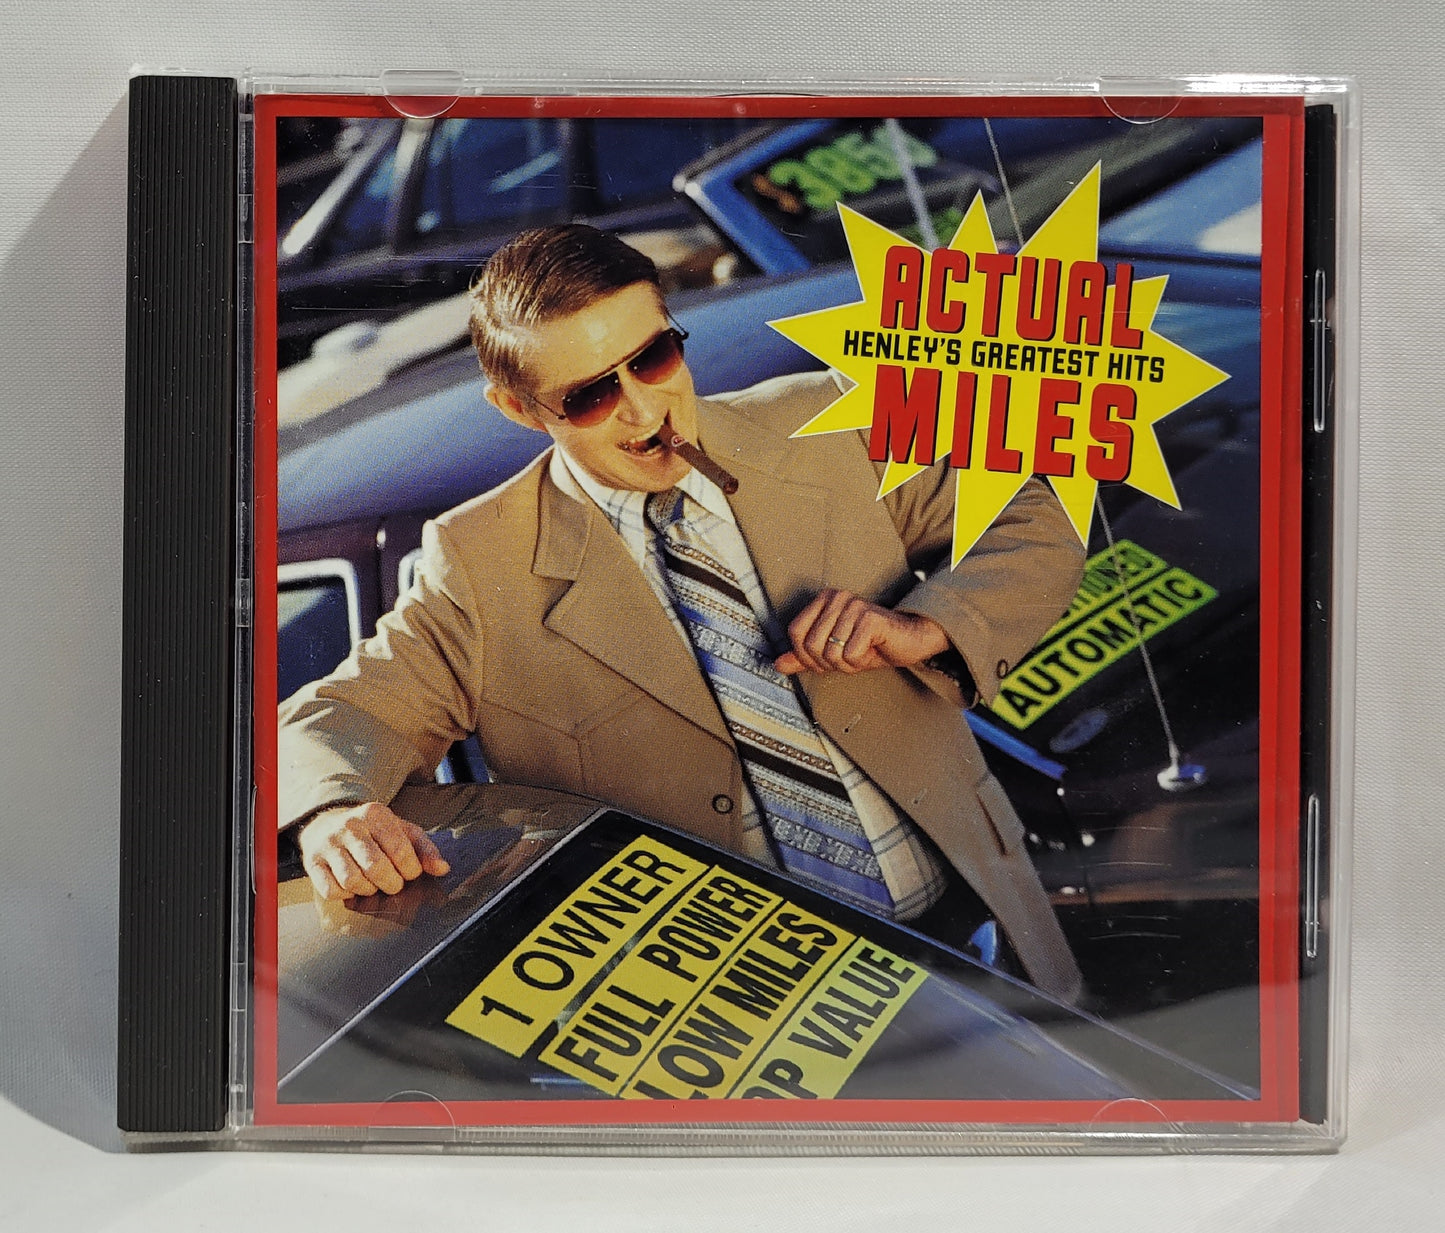 Don Henley - Actual Miles (Henley's Greatest Hits) [CD]